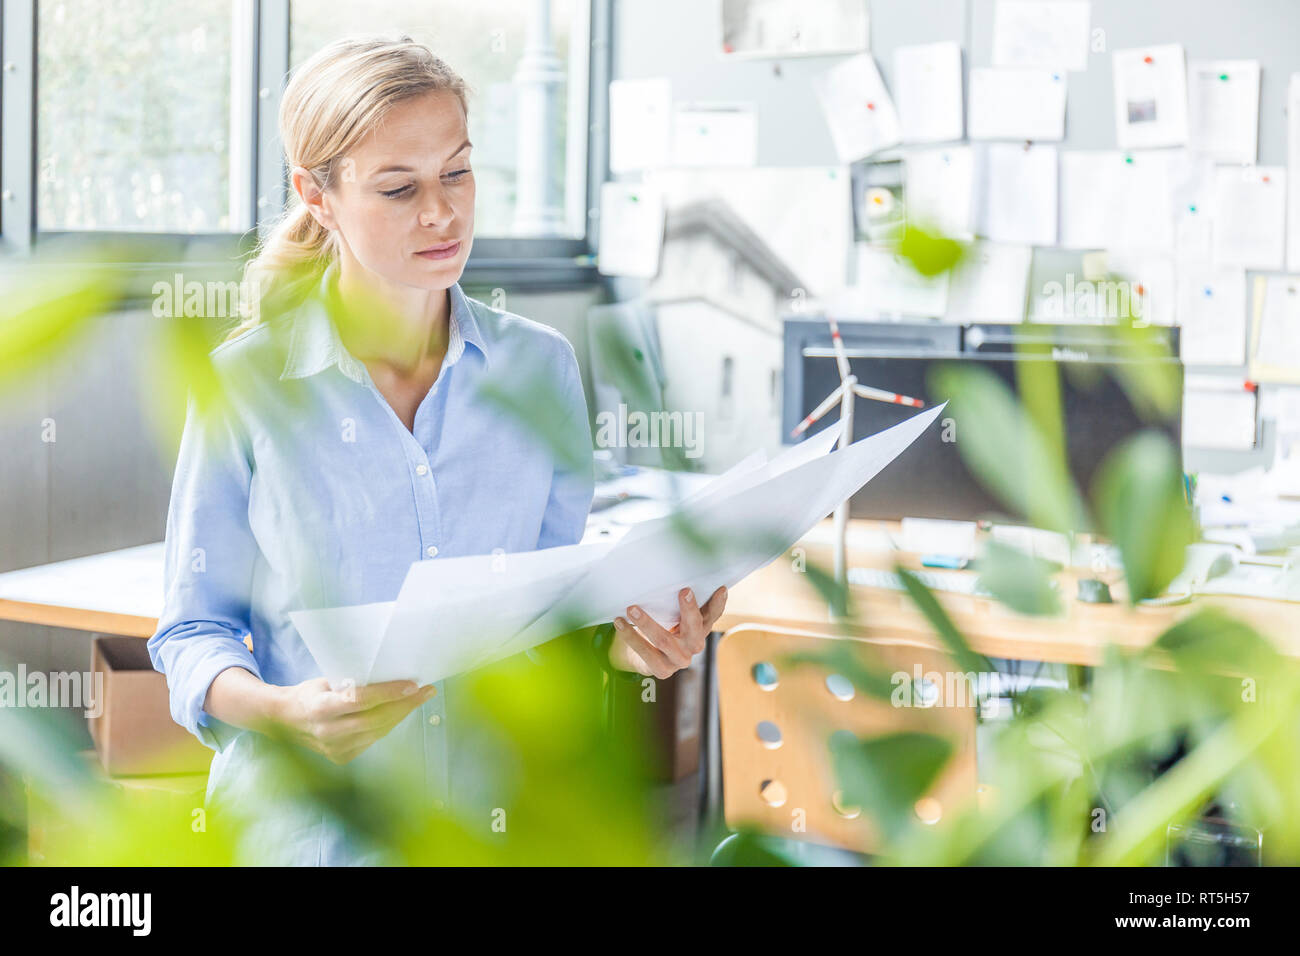 Woman in office working on plan with wind turbine model on table Stock Photo